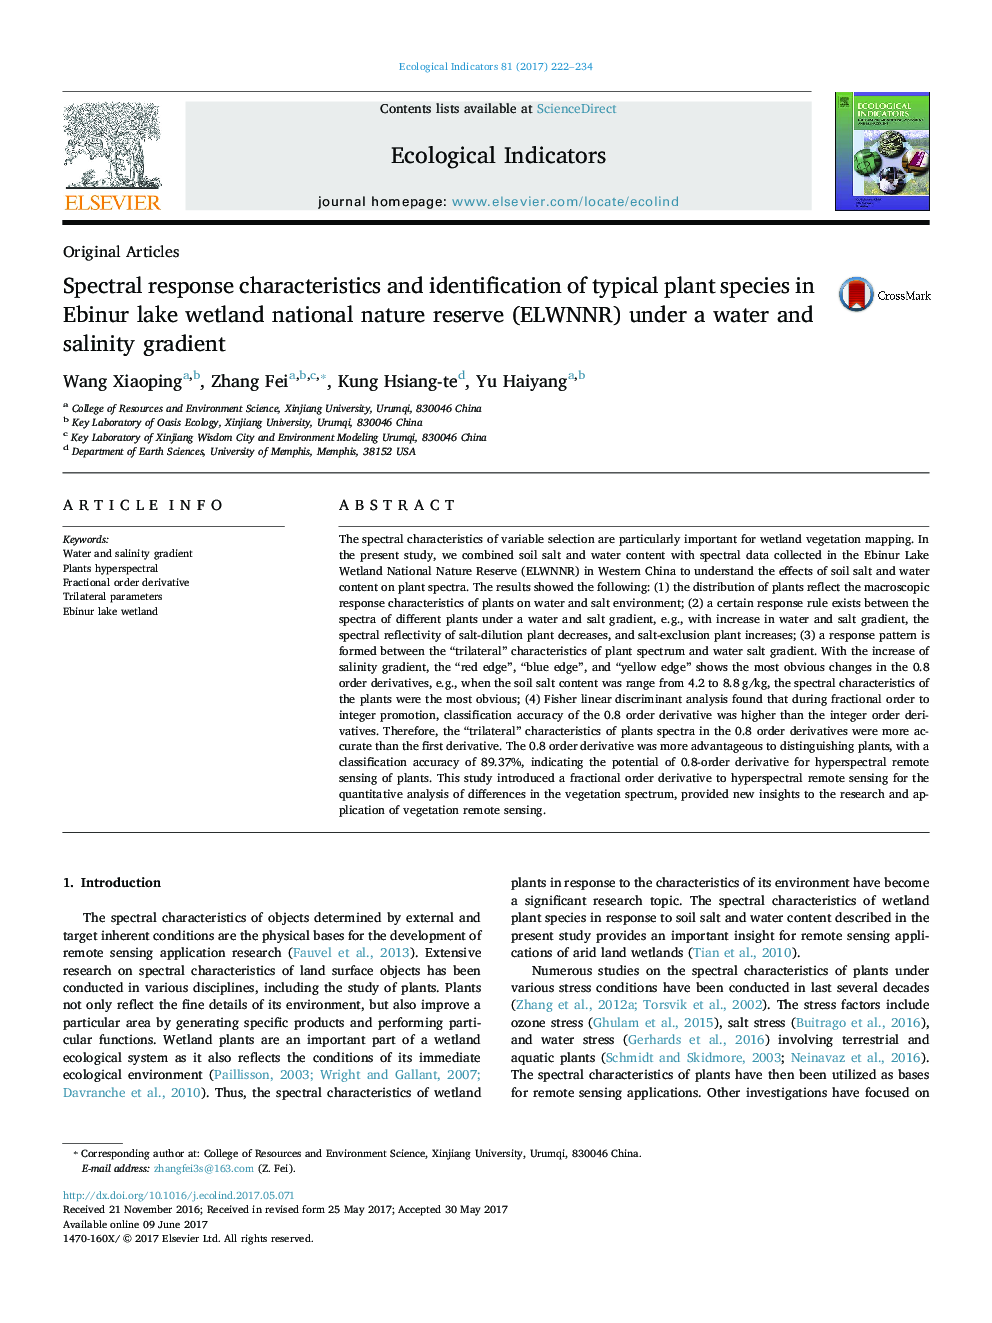 Original ArticlesSpectral response characteristics and identification of typical plant species in Ebinur lake wetland national nature reserve (ELWNNR) under a water and salinity gradient